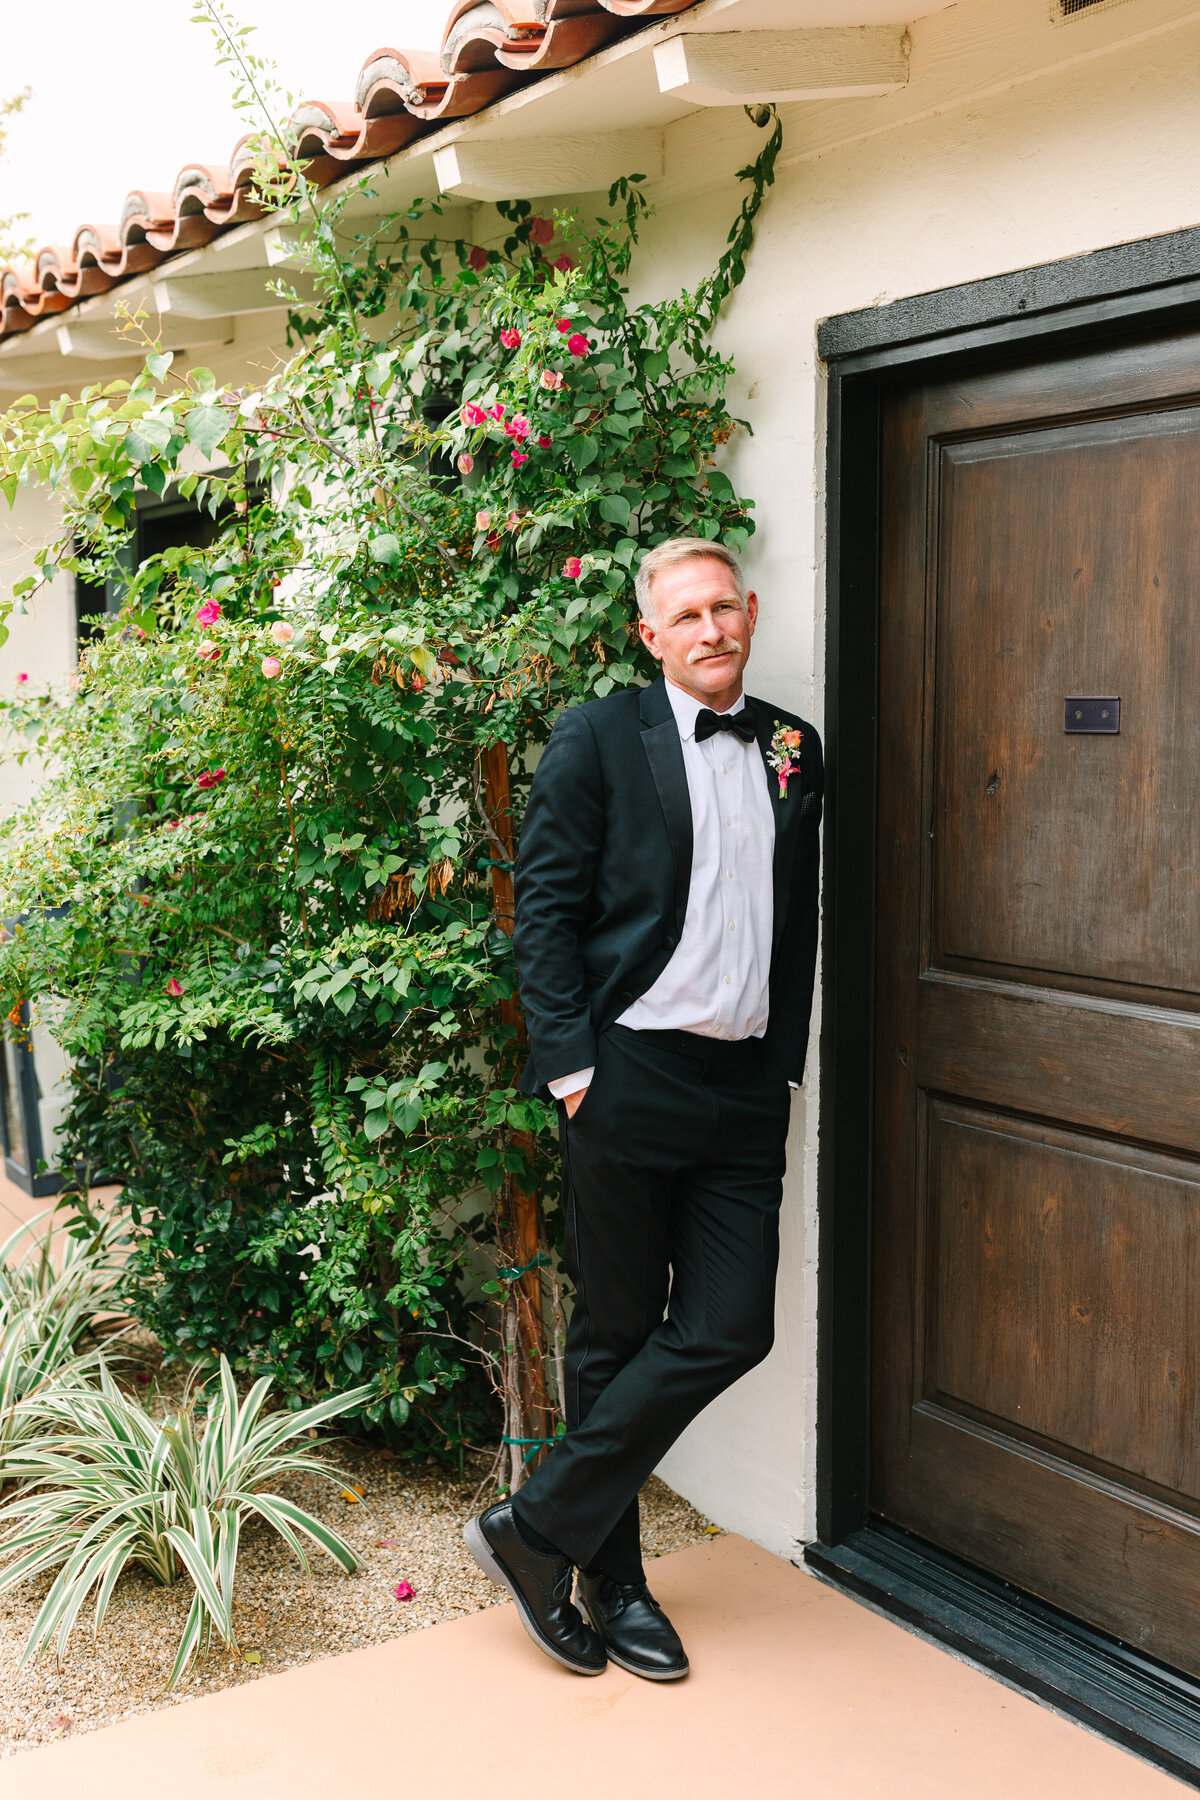 groom casually leaning against side of a building in napa with greenery beside him and dressed in tuxedo.